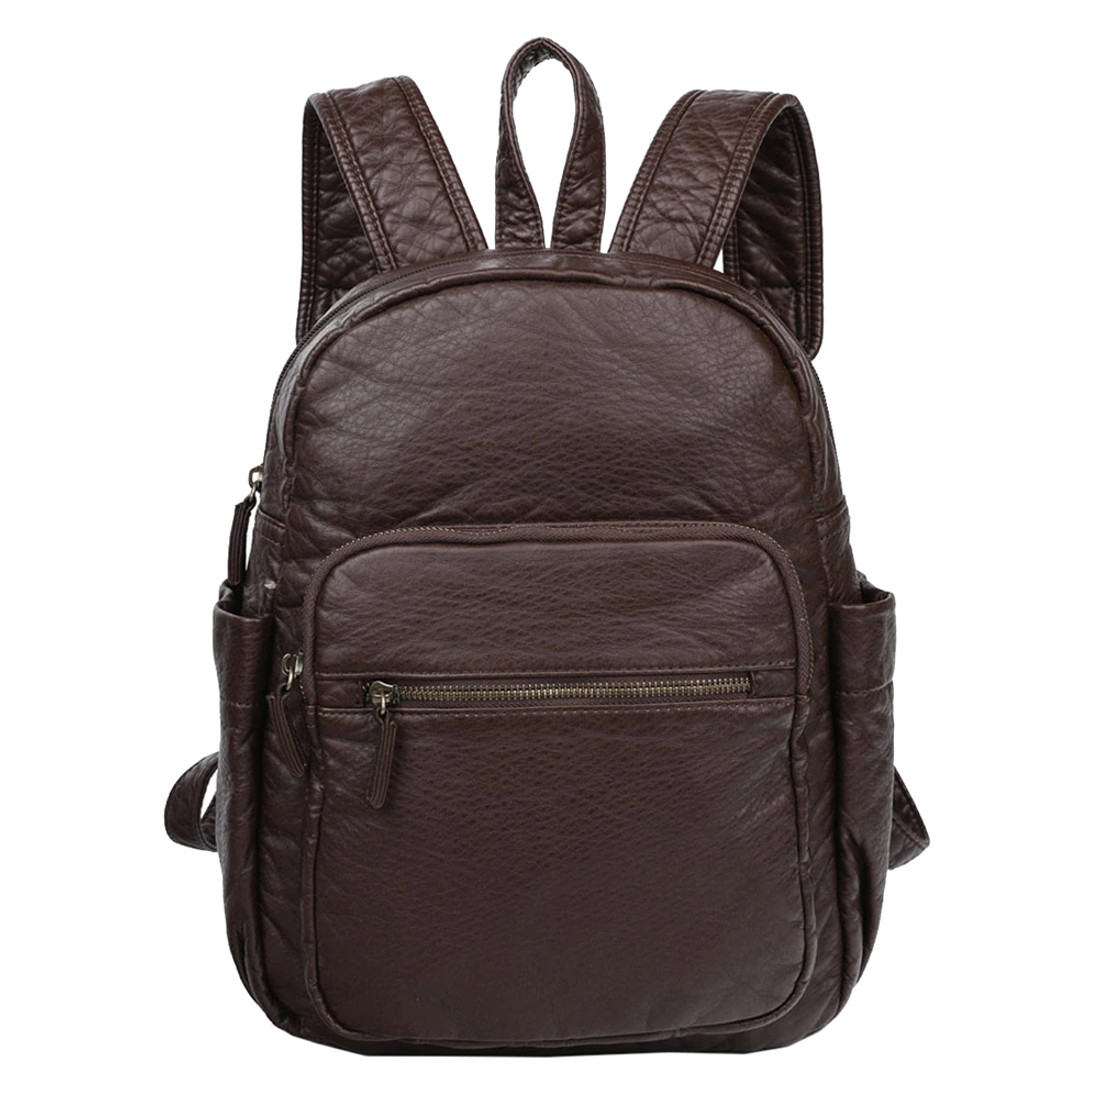 Chocolate Brown Vegan Leather Backpack Purse